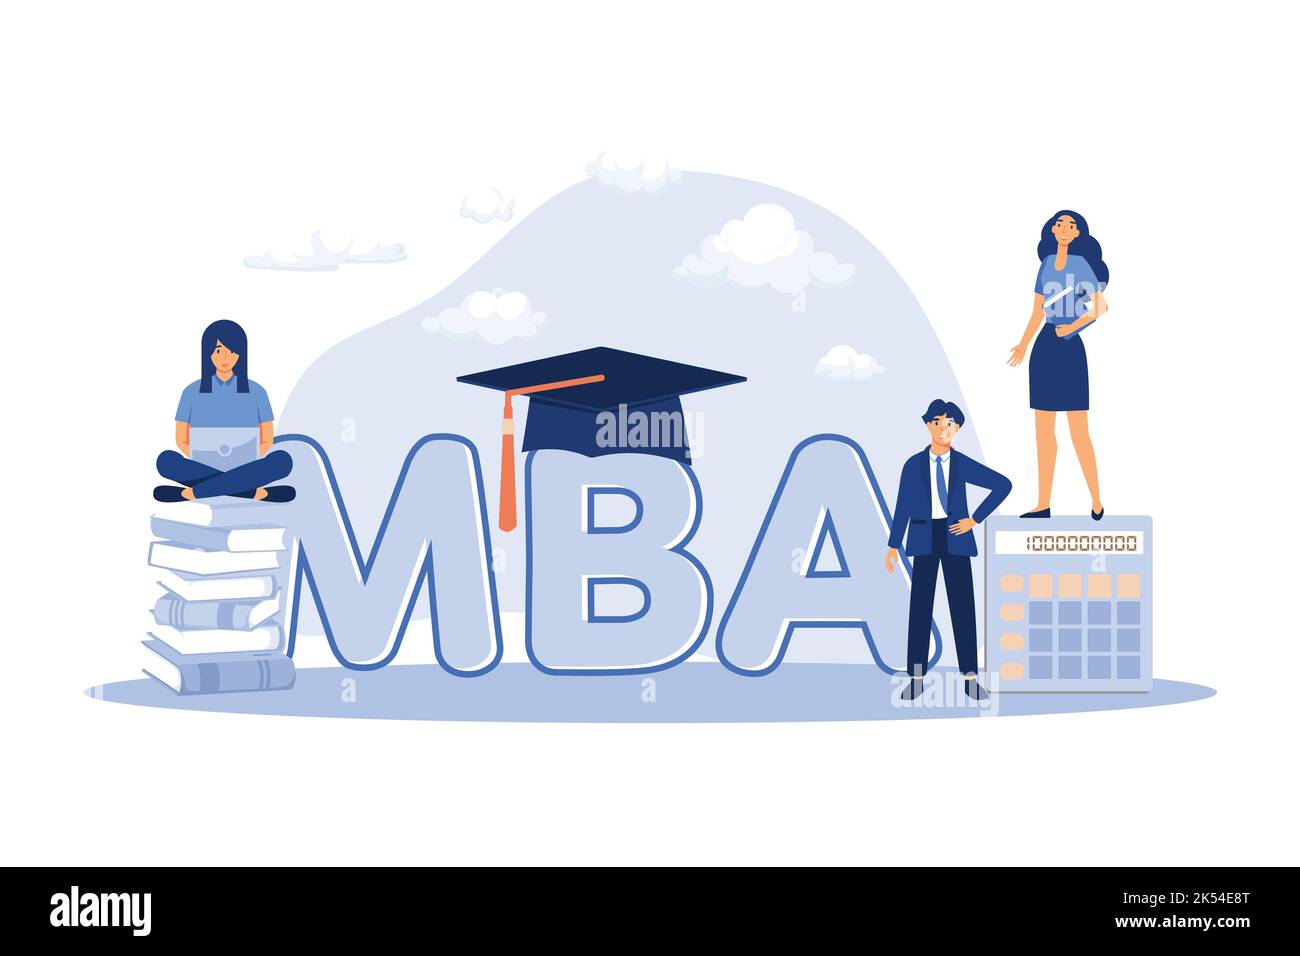 Graduate students studying business administration and management, getting master degree. Flat vector illustration for education, knowledge, MBA schoo Stock Vector